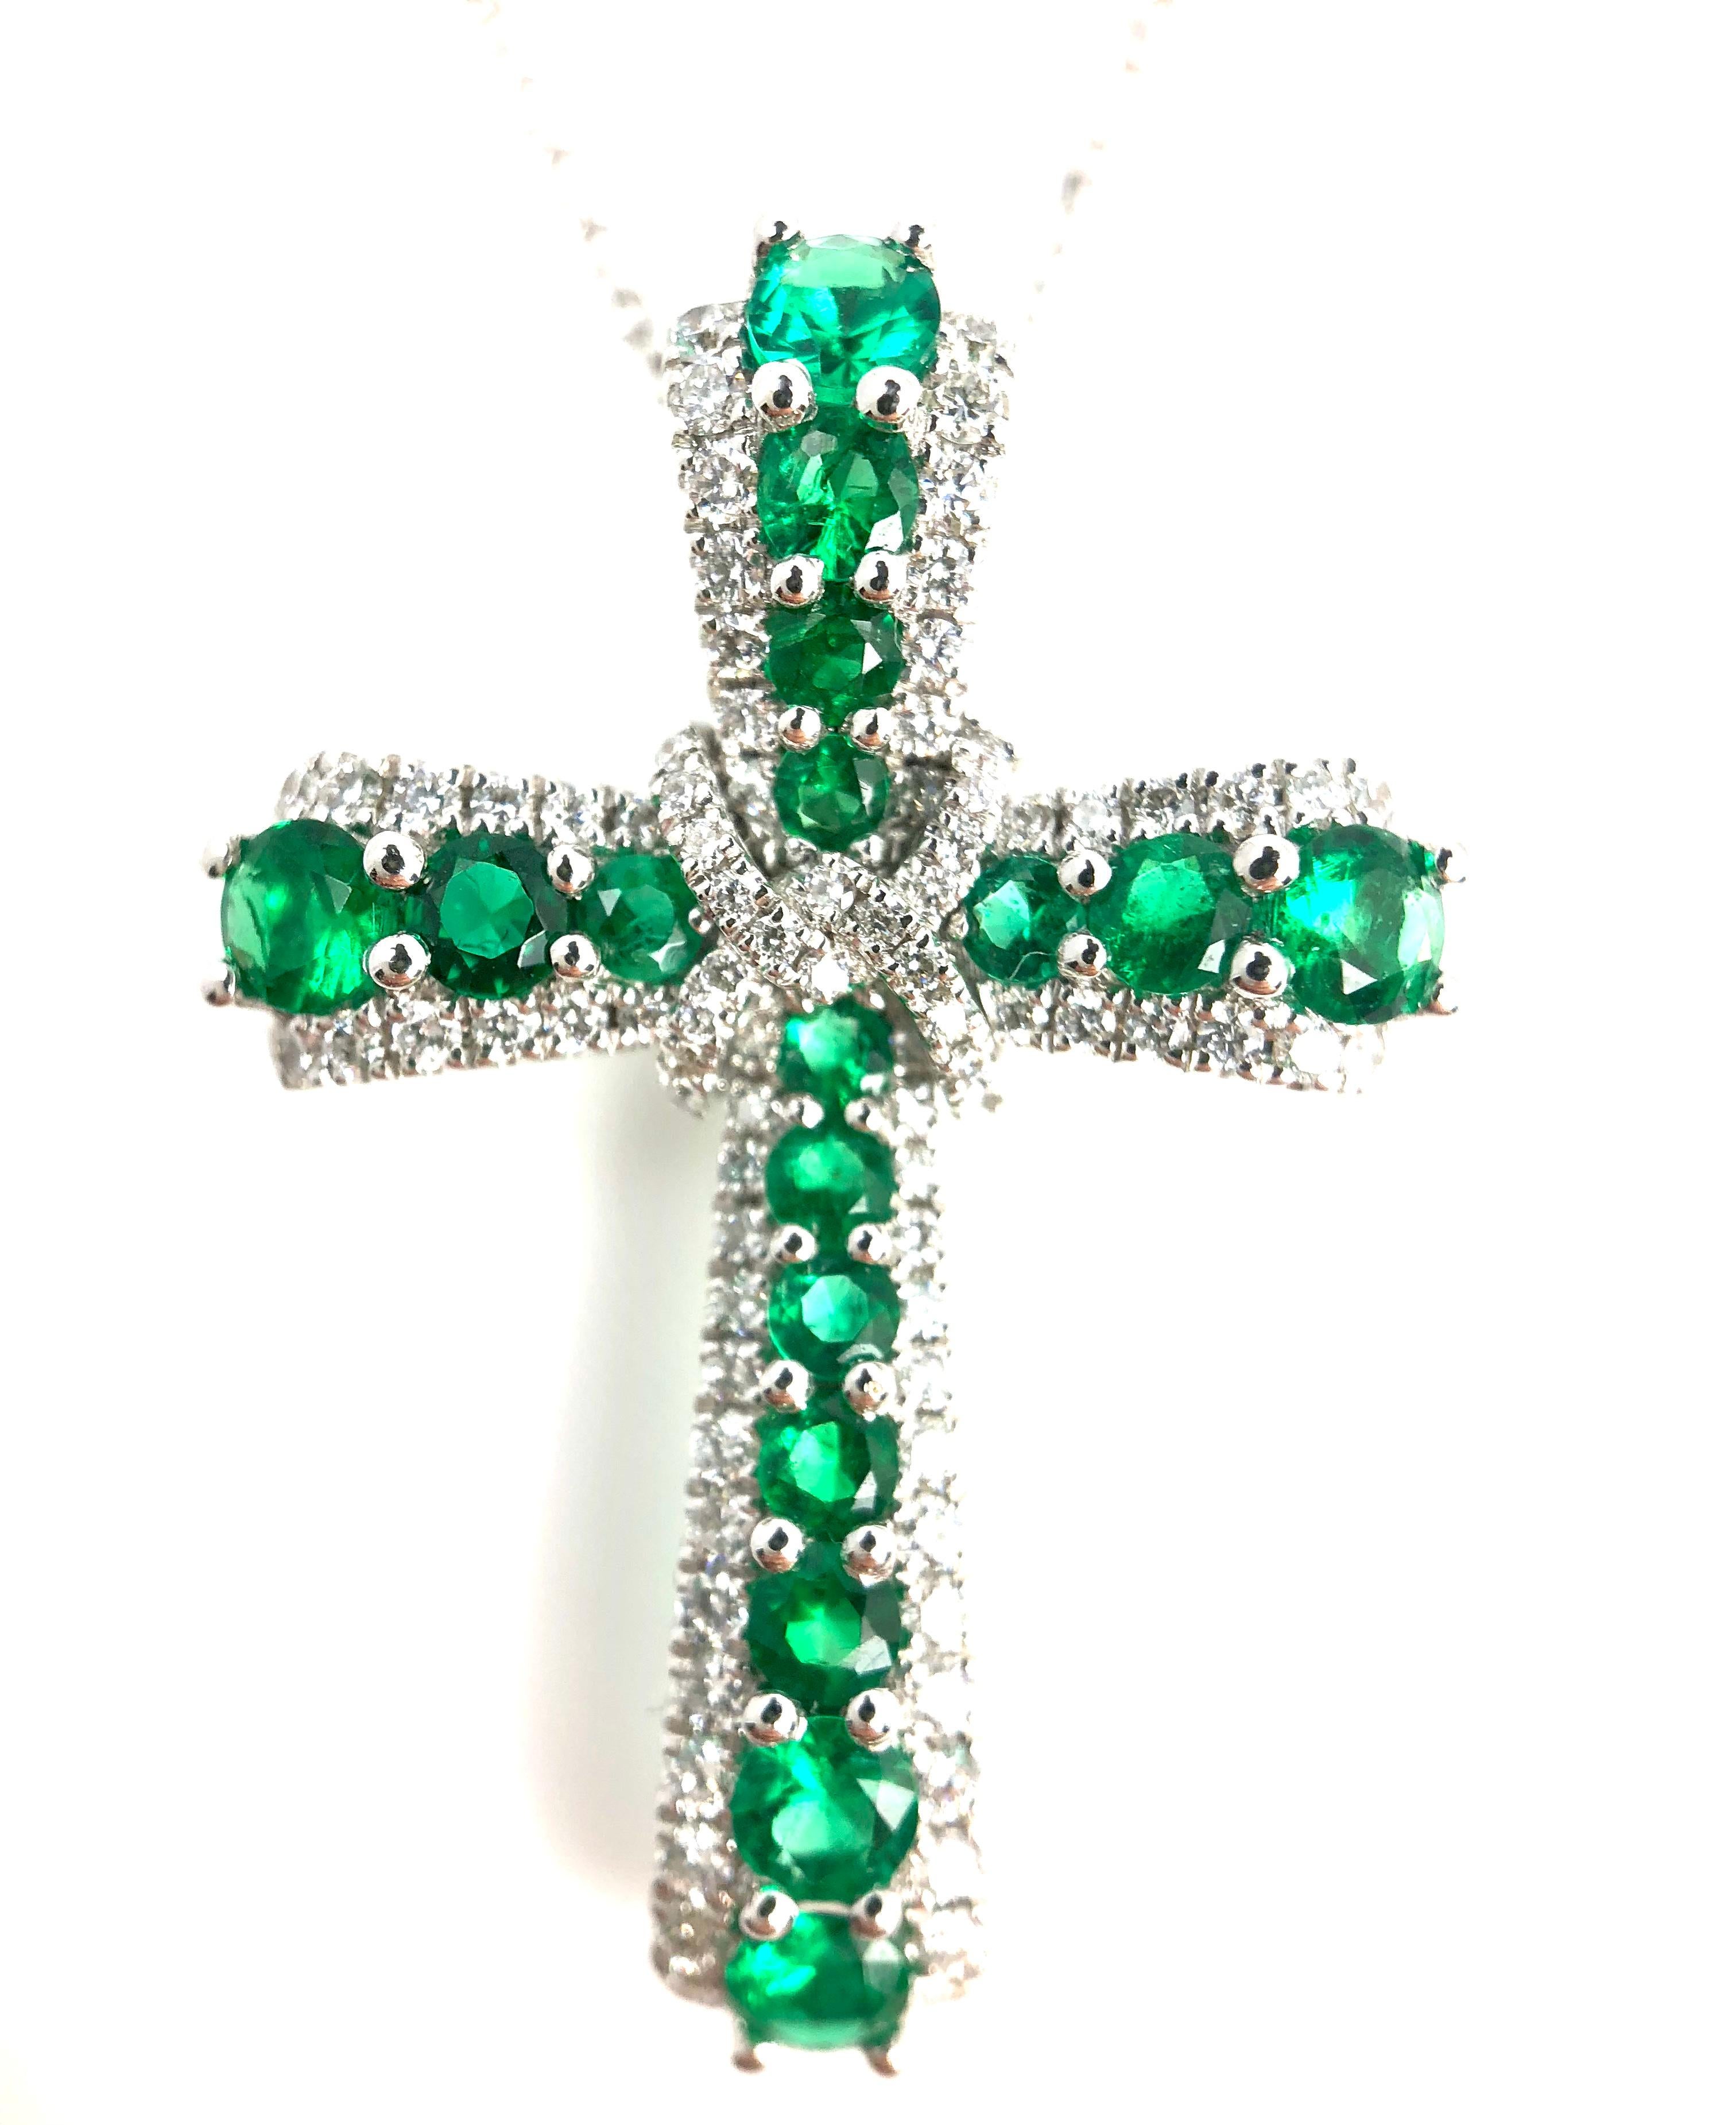 (DiamondTown) This pendant features 0.87 carats emeralds arranged in a cross and surrounded by a halo of white diamonds. An additional diamond embellishment surrounds the center of the cross. The total diamond weight is 0.39 carats.

Set in 18k